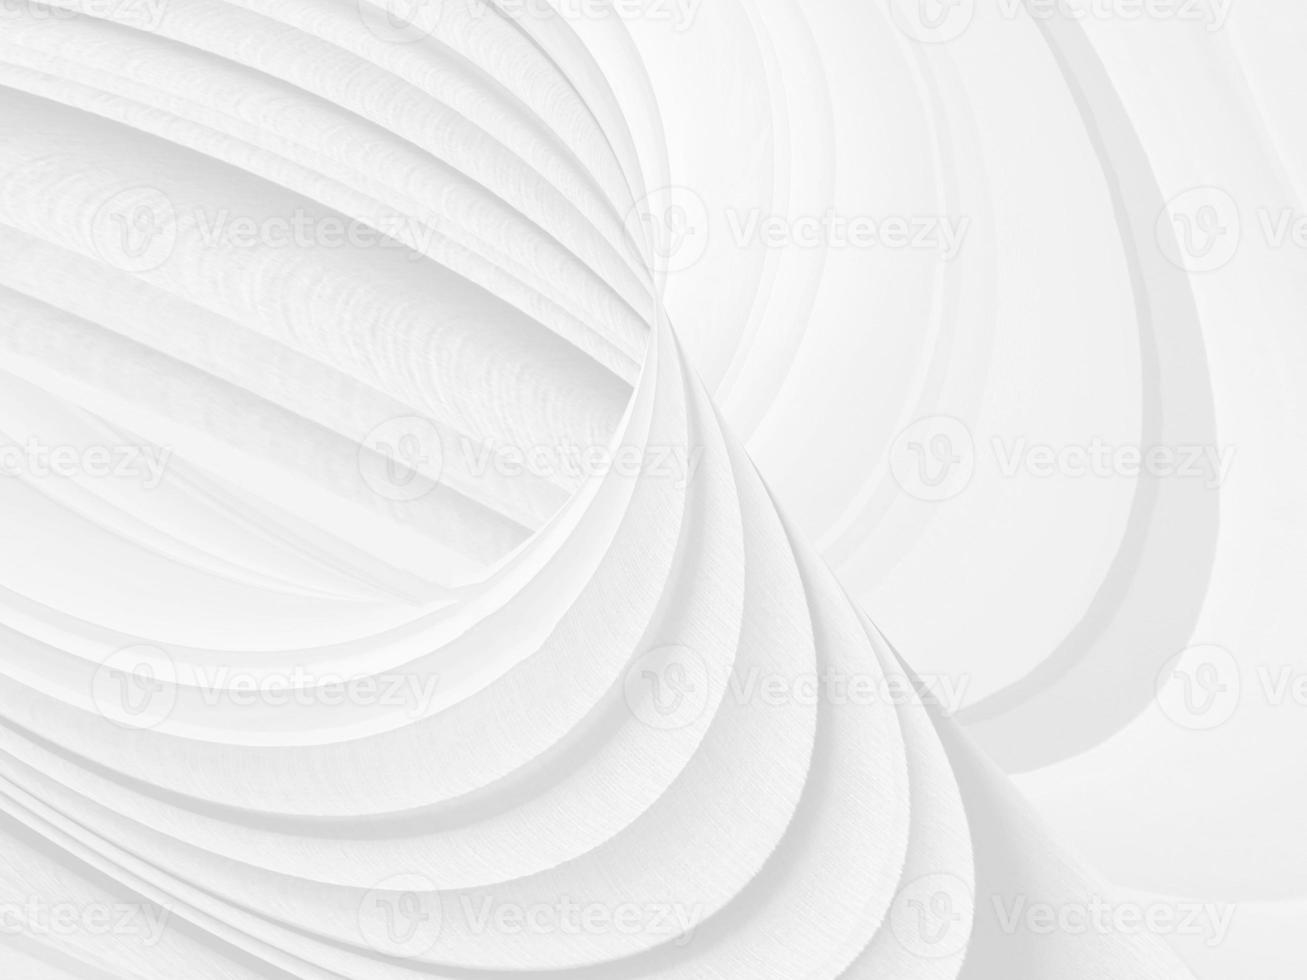 soft fabric Clean fashion woven beautiful abstract smooth curve shape decorative textile white background photo